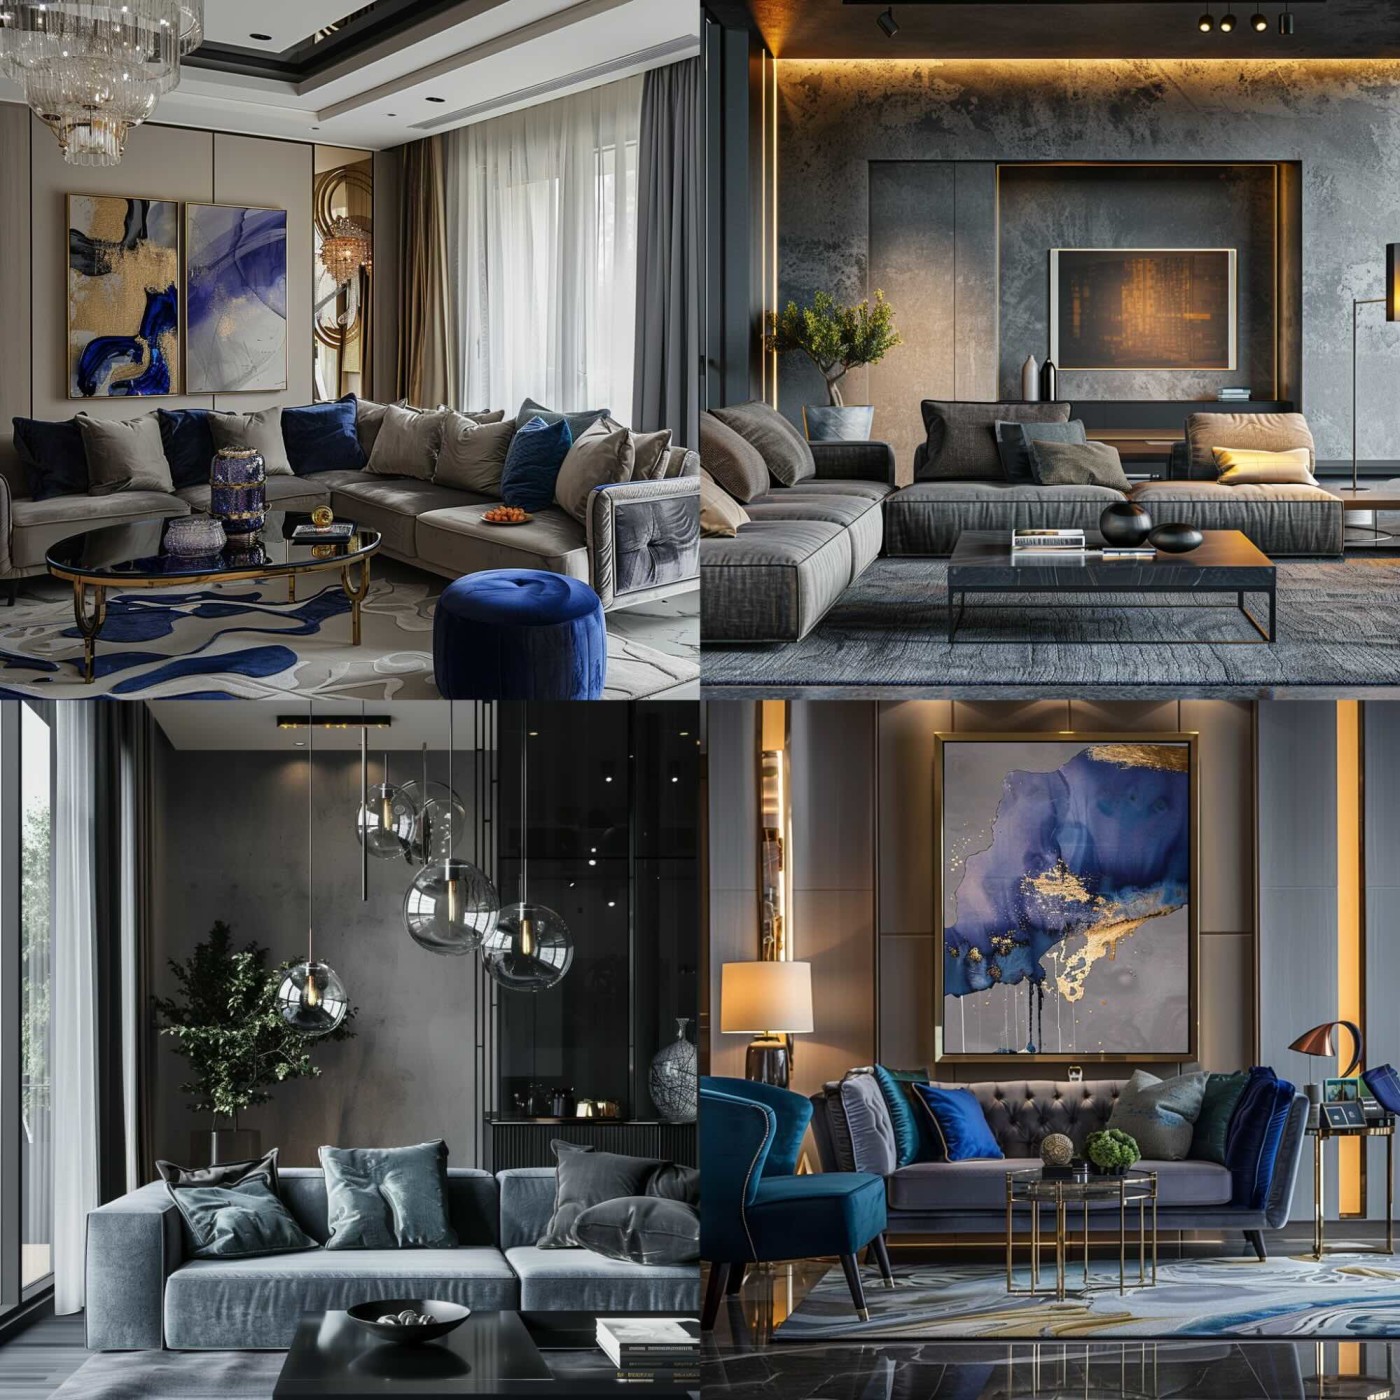 A living room in a luxury apartment, cool tones